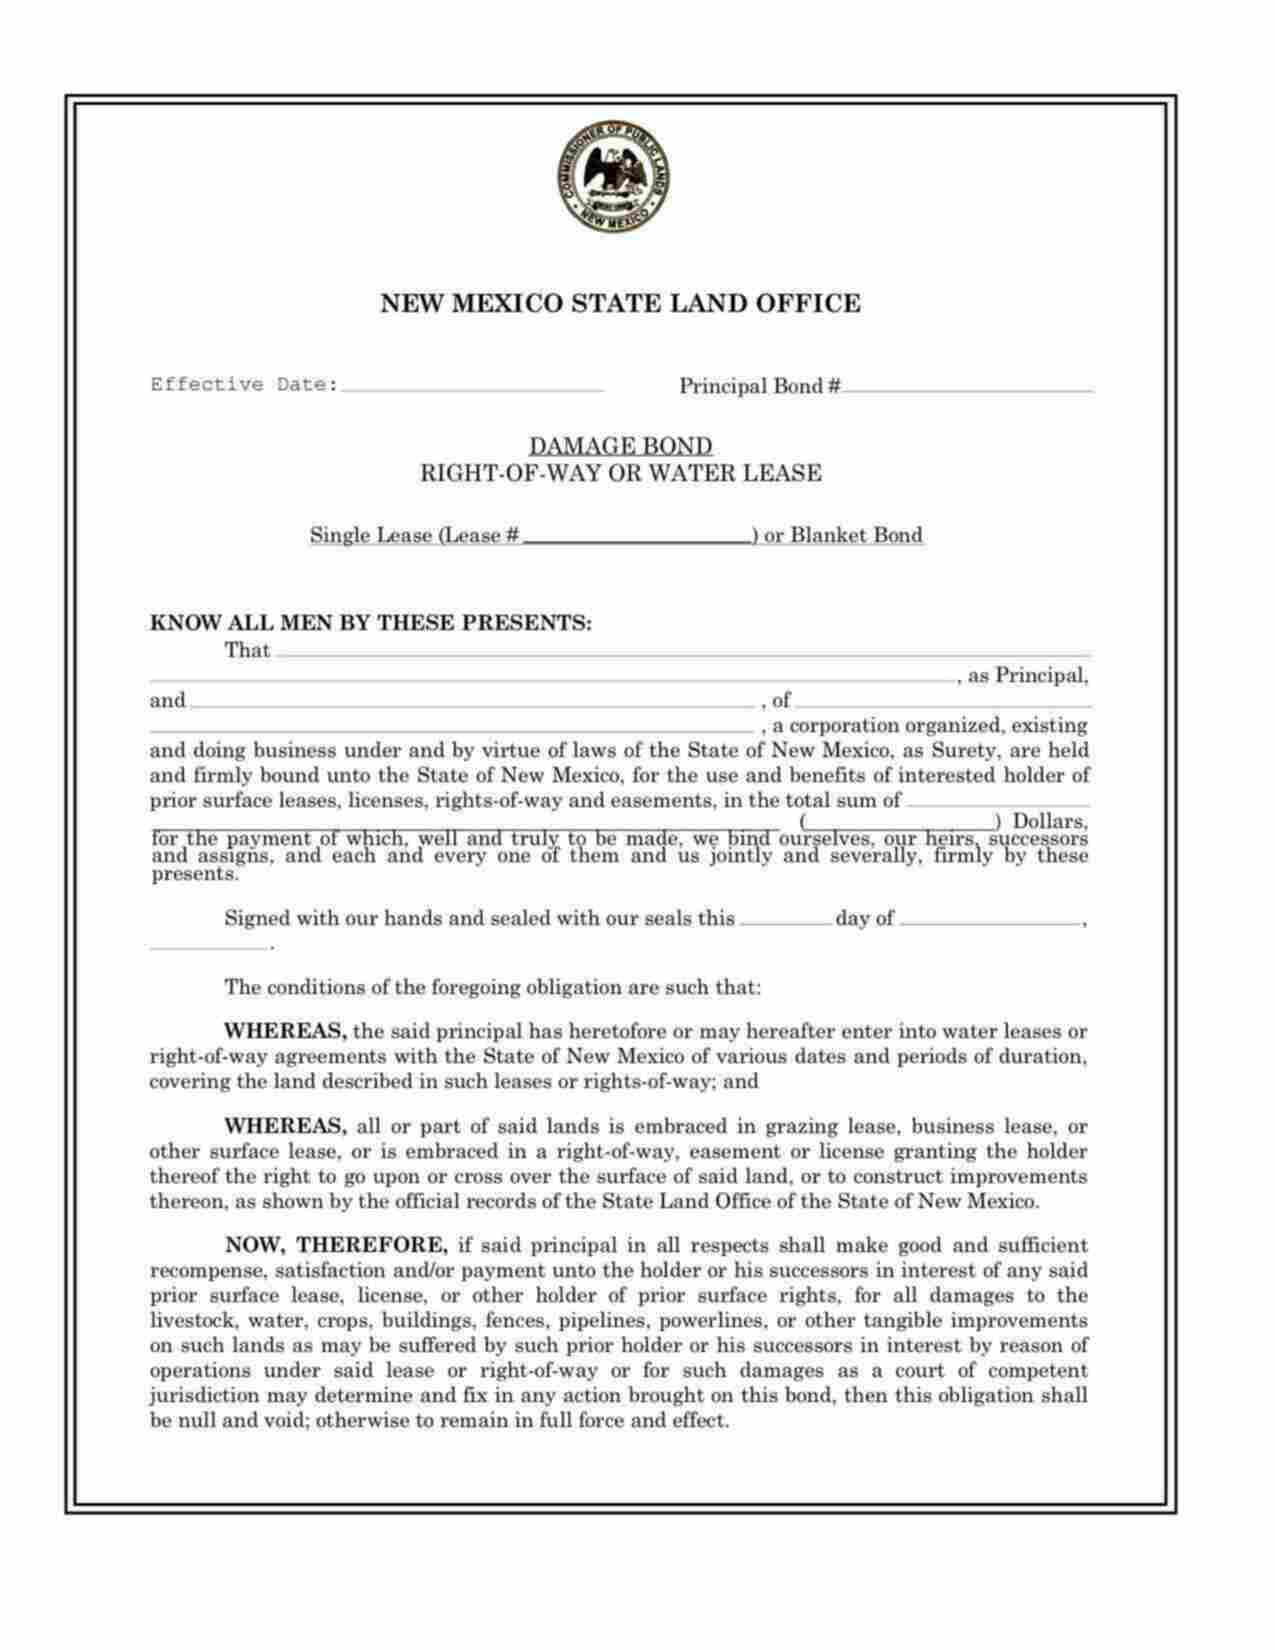 New Mexico Right-of-Way or Water Lease - Damage Bond Form